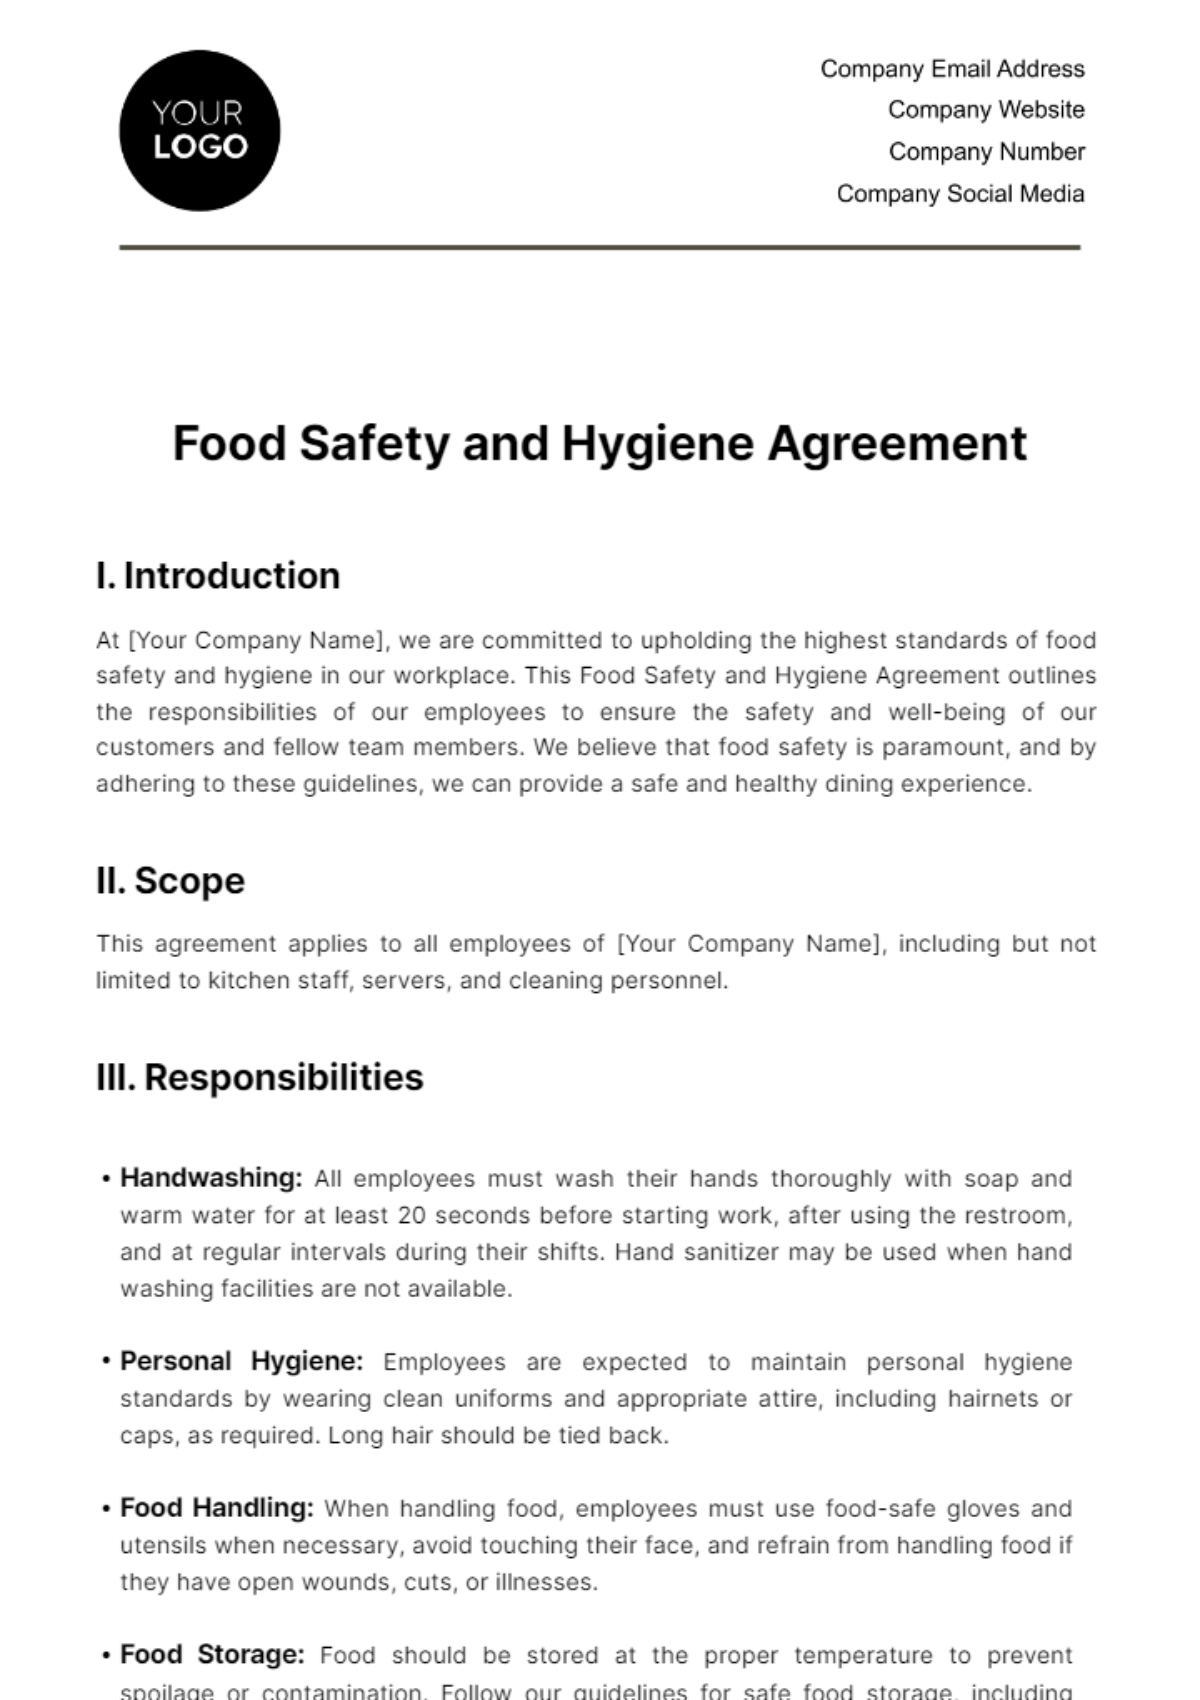 Food Safety and Hygiene Agreement HR Template